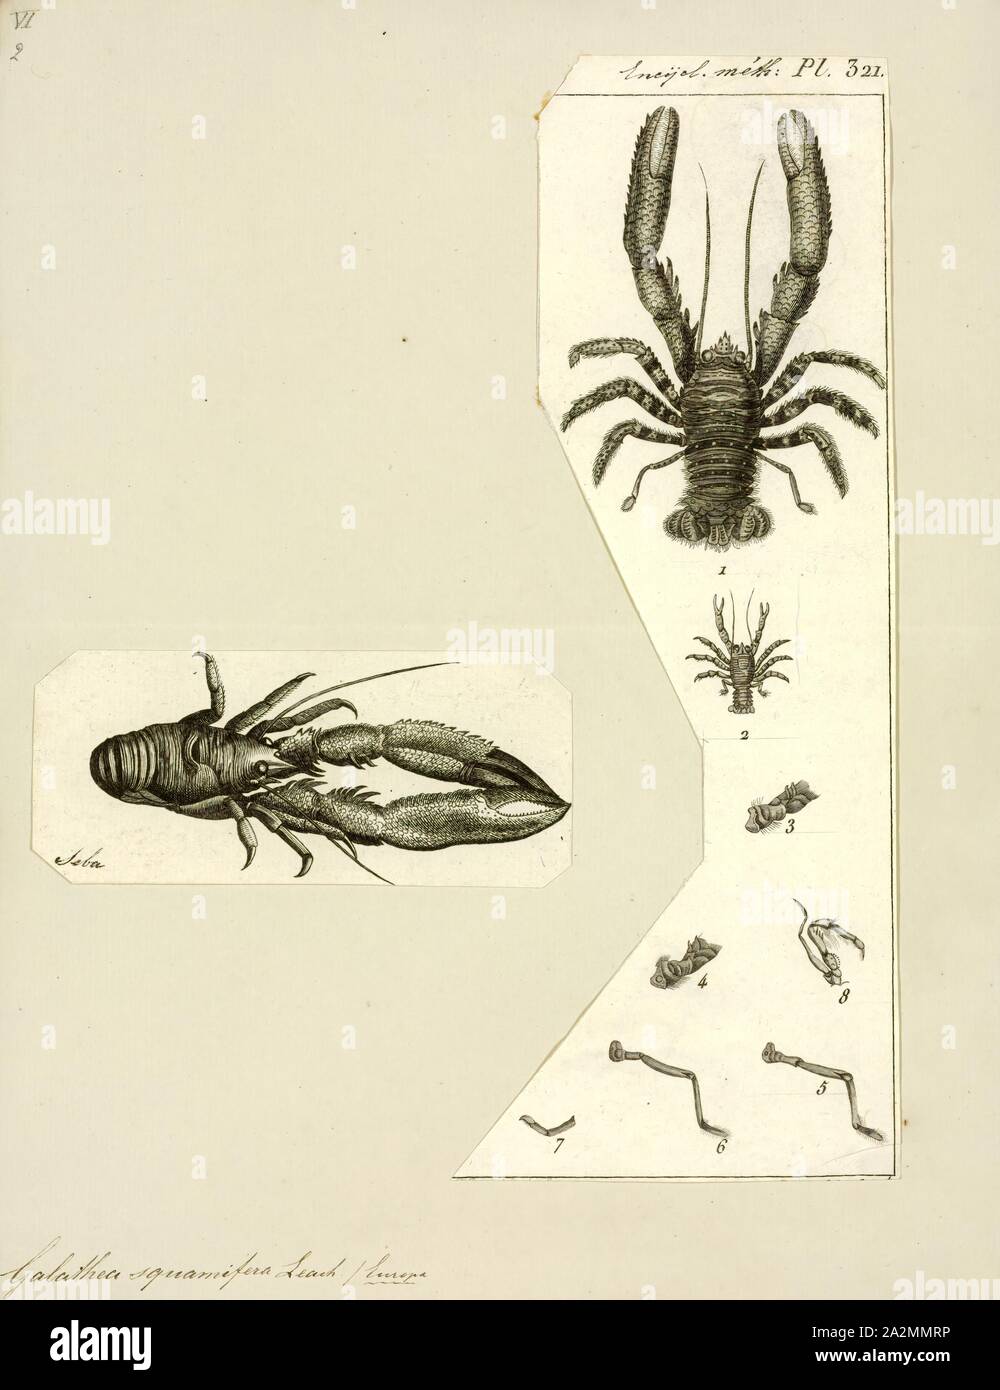 Galathea squamifera, Print, Galathea squamifera, the black squat lobster, or Montagu's plated lobster, is a species of squat lobster that lives in the north-east Atlantic Ocean and Mediterranean Sea Stock Photo